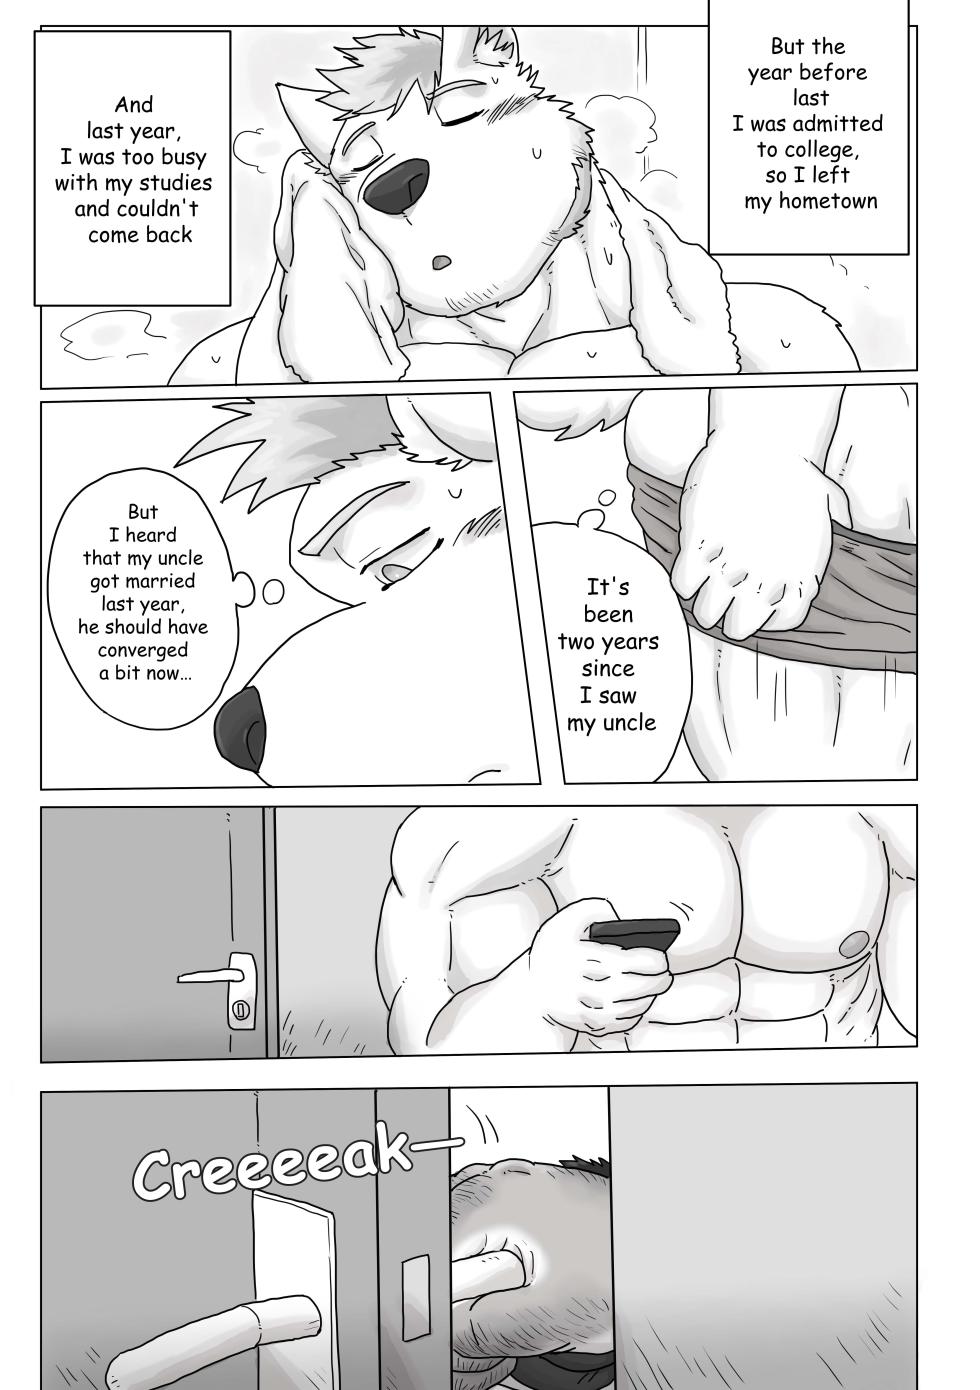 [Renoky] Jikka no Ossan wa Daisukebe!! | My hometown‘s uncle is a Horny Hung!! [English] [Decensored] [Digital] - Page 11